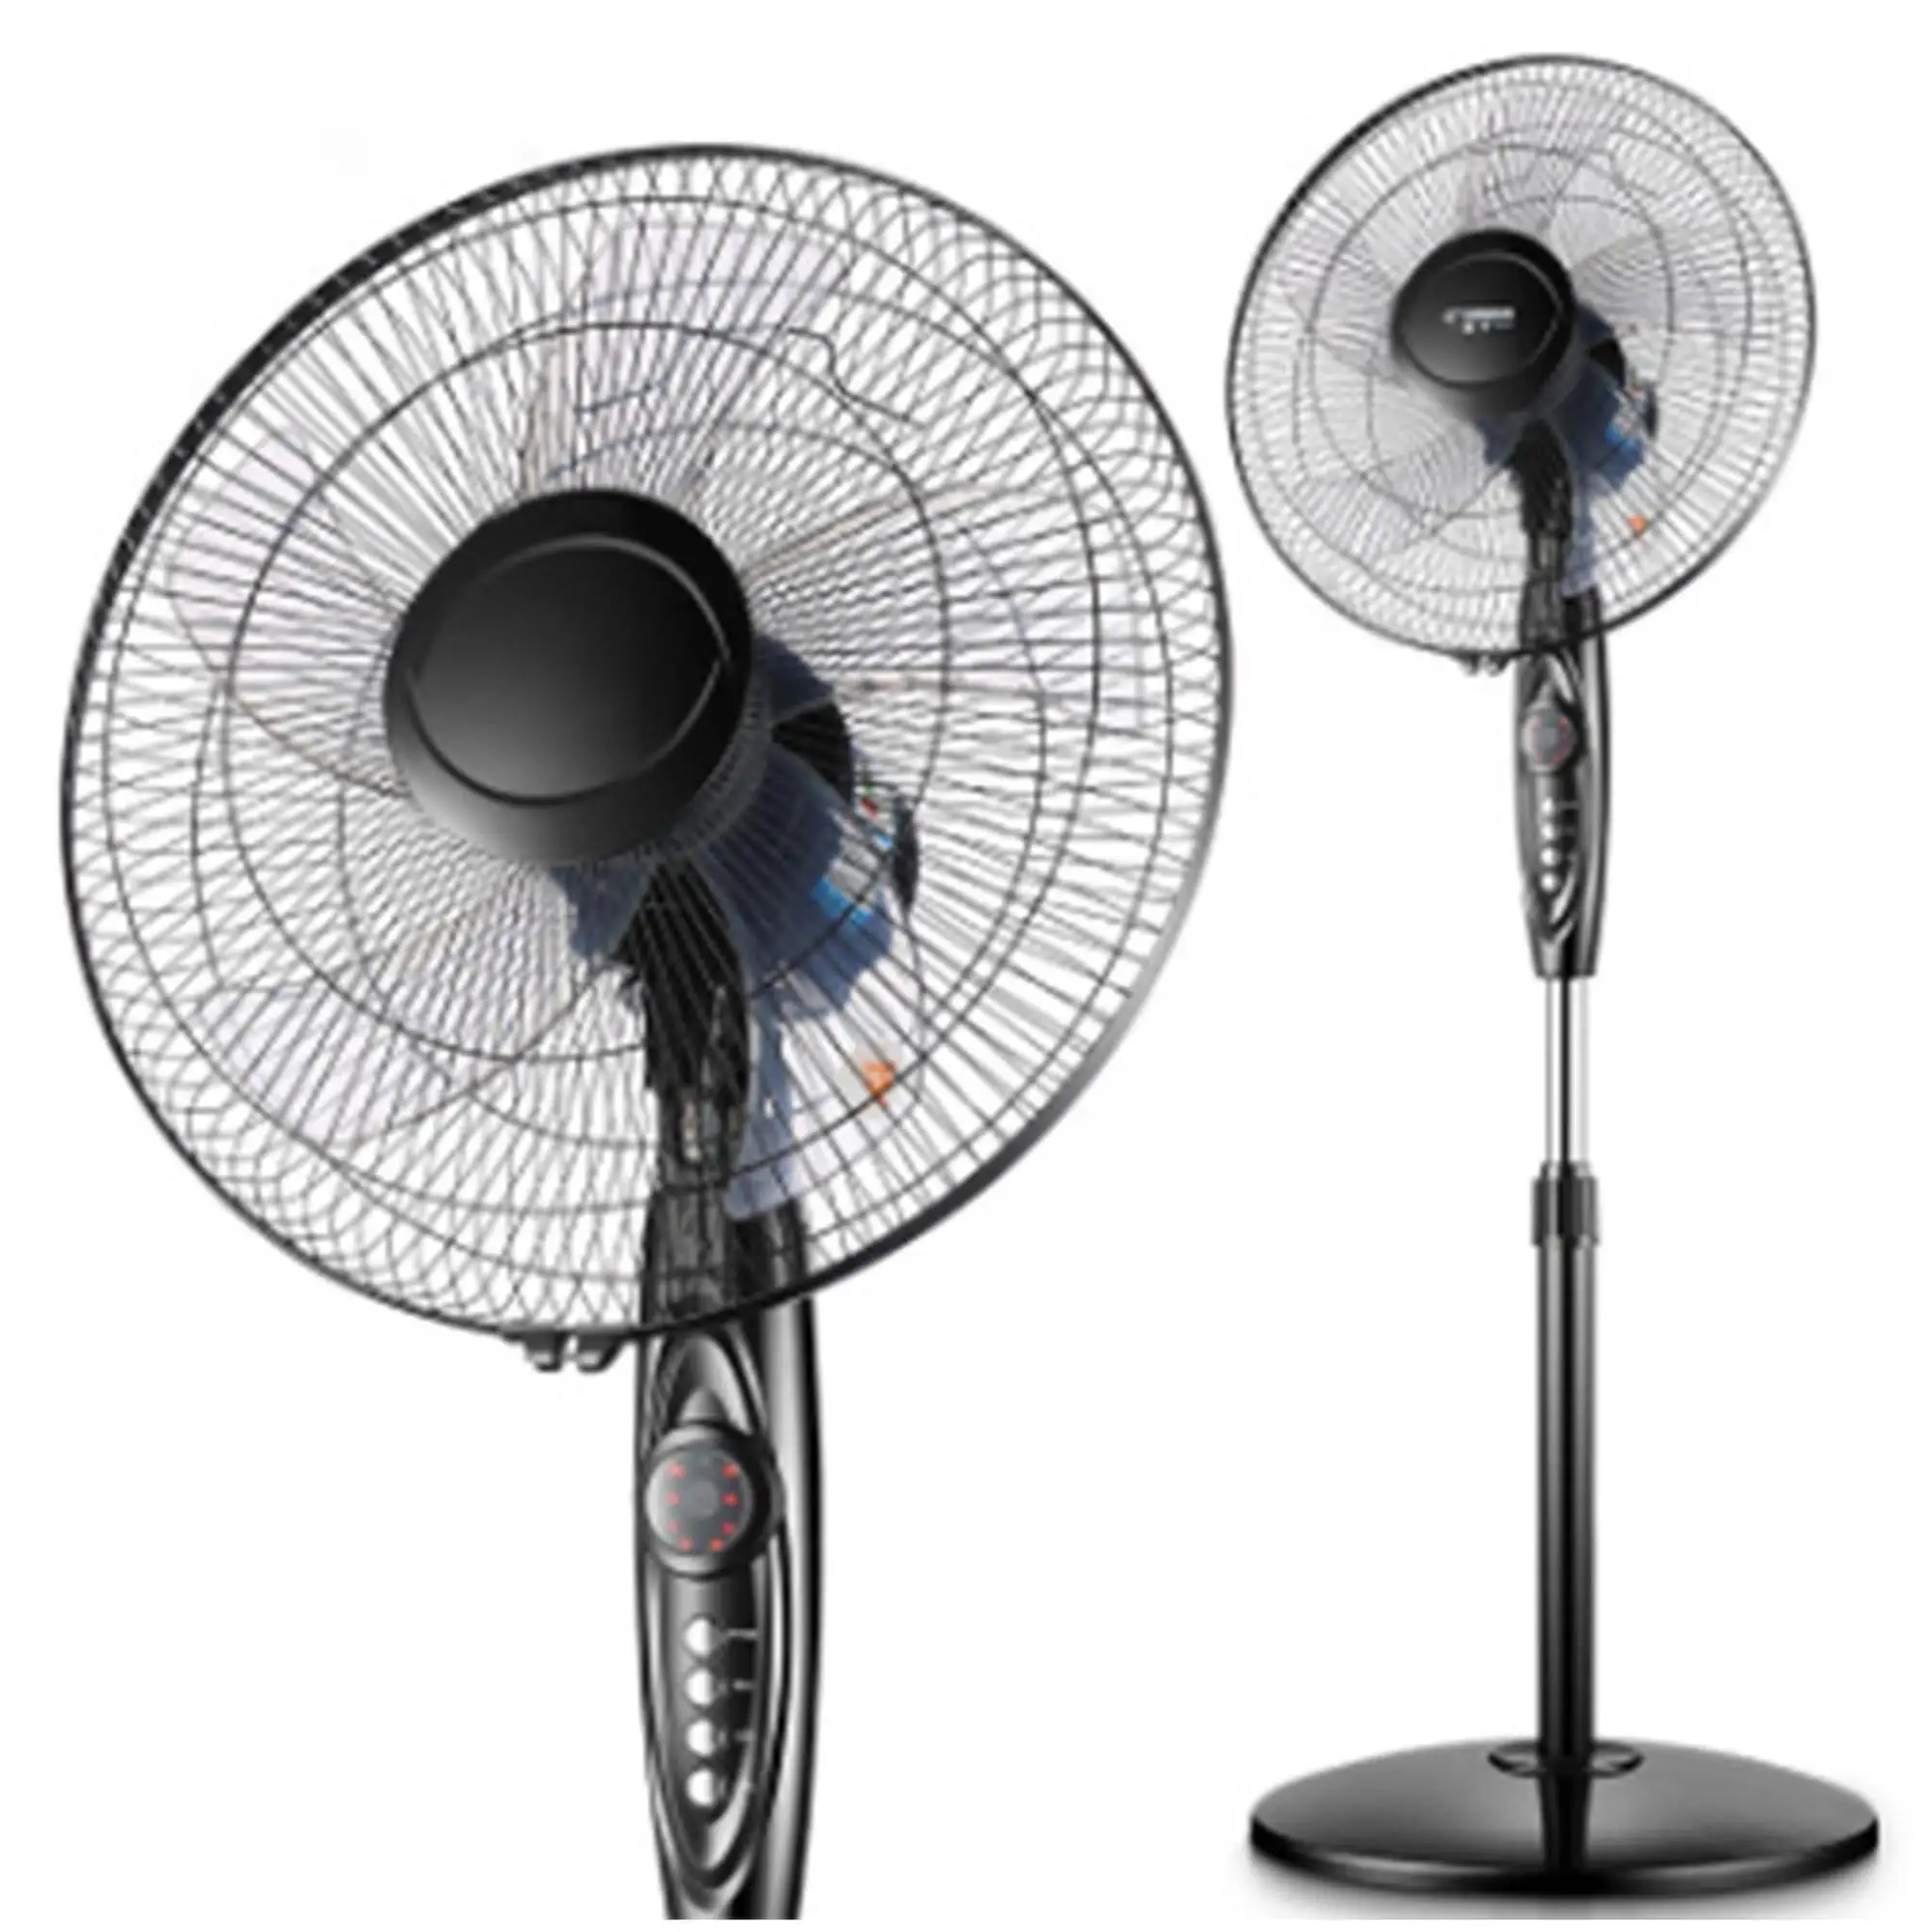 
2021 New 16 Inch Three Speed Low Noise Stand Fan with Remote Control 